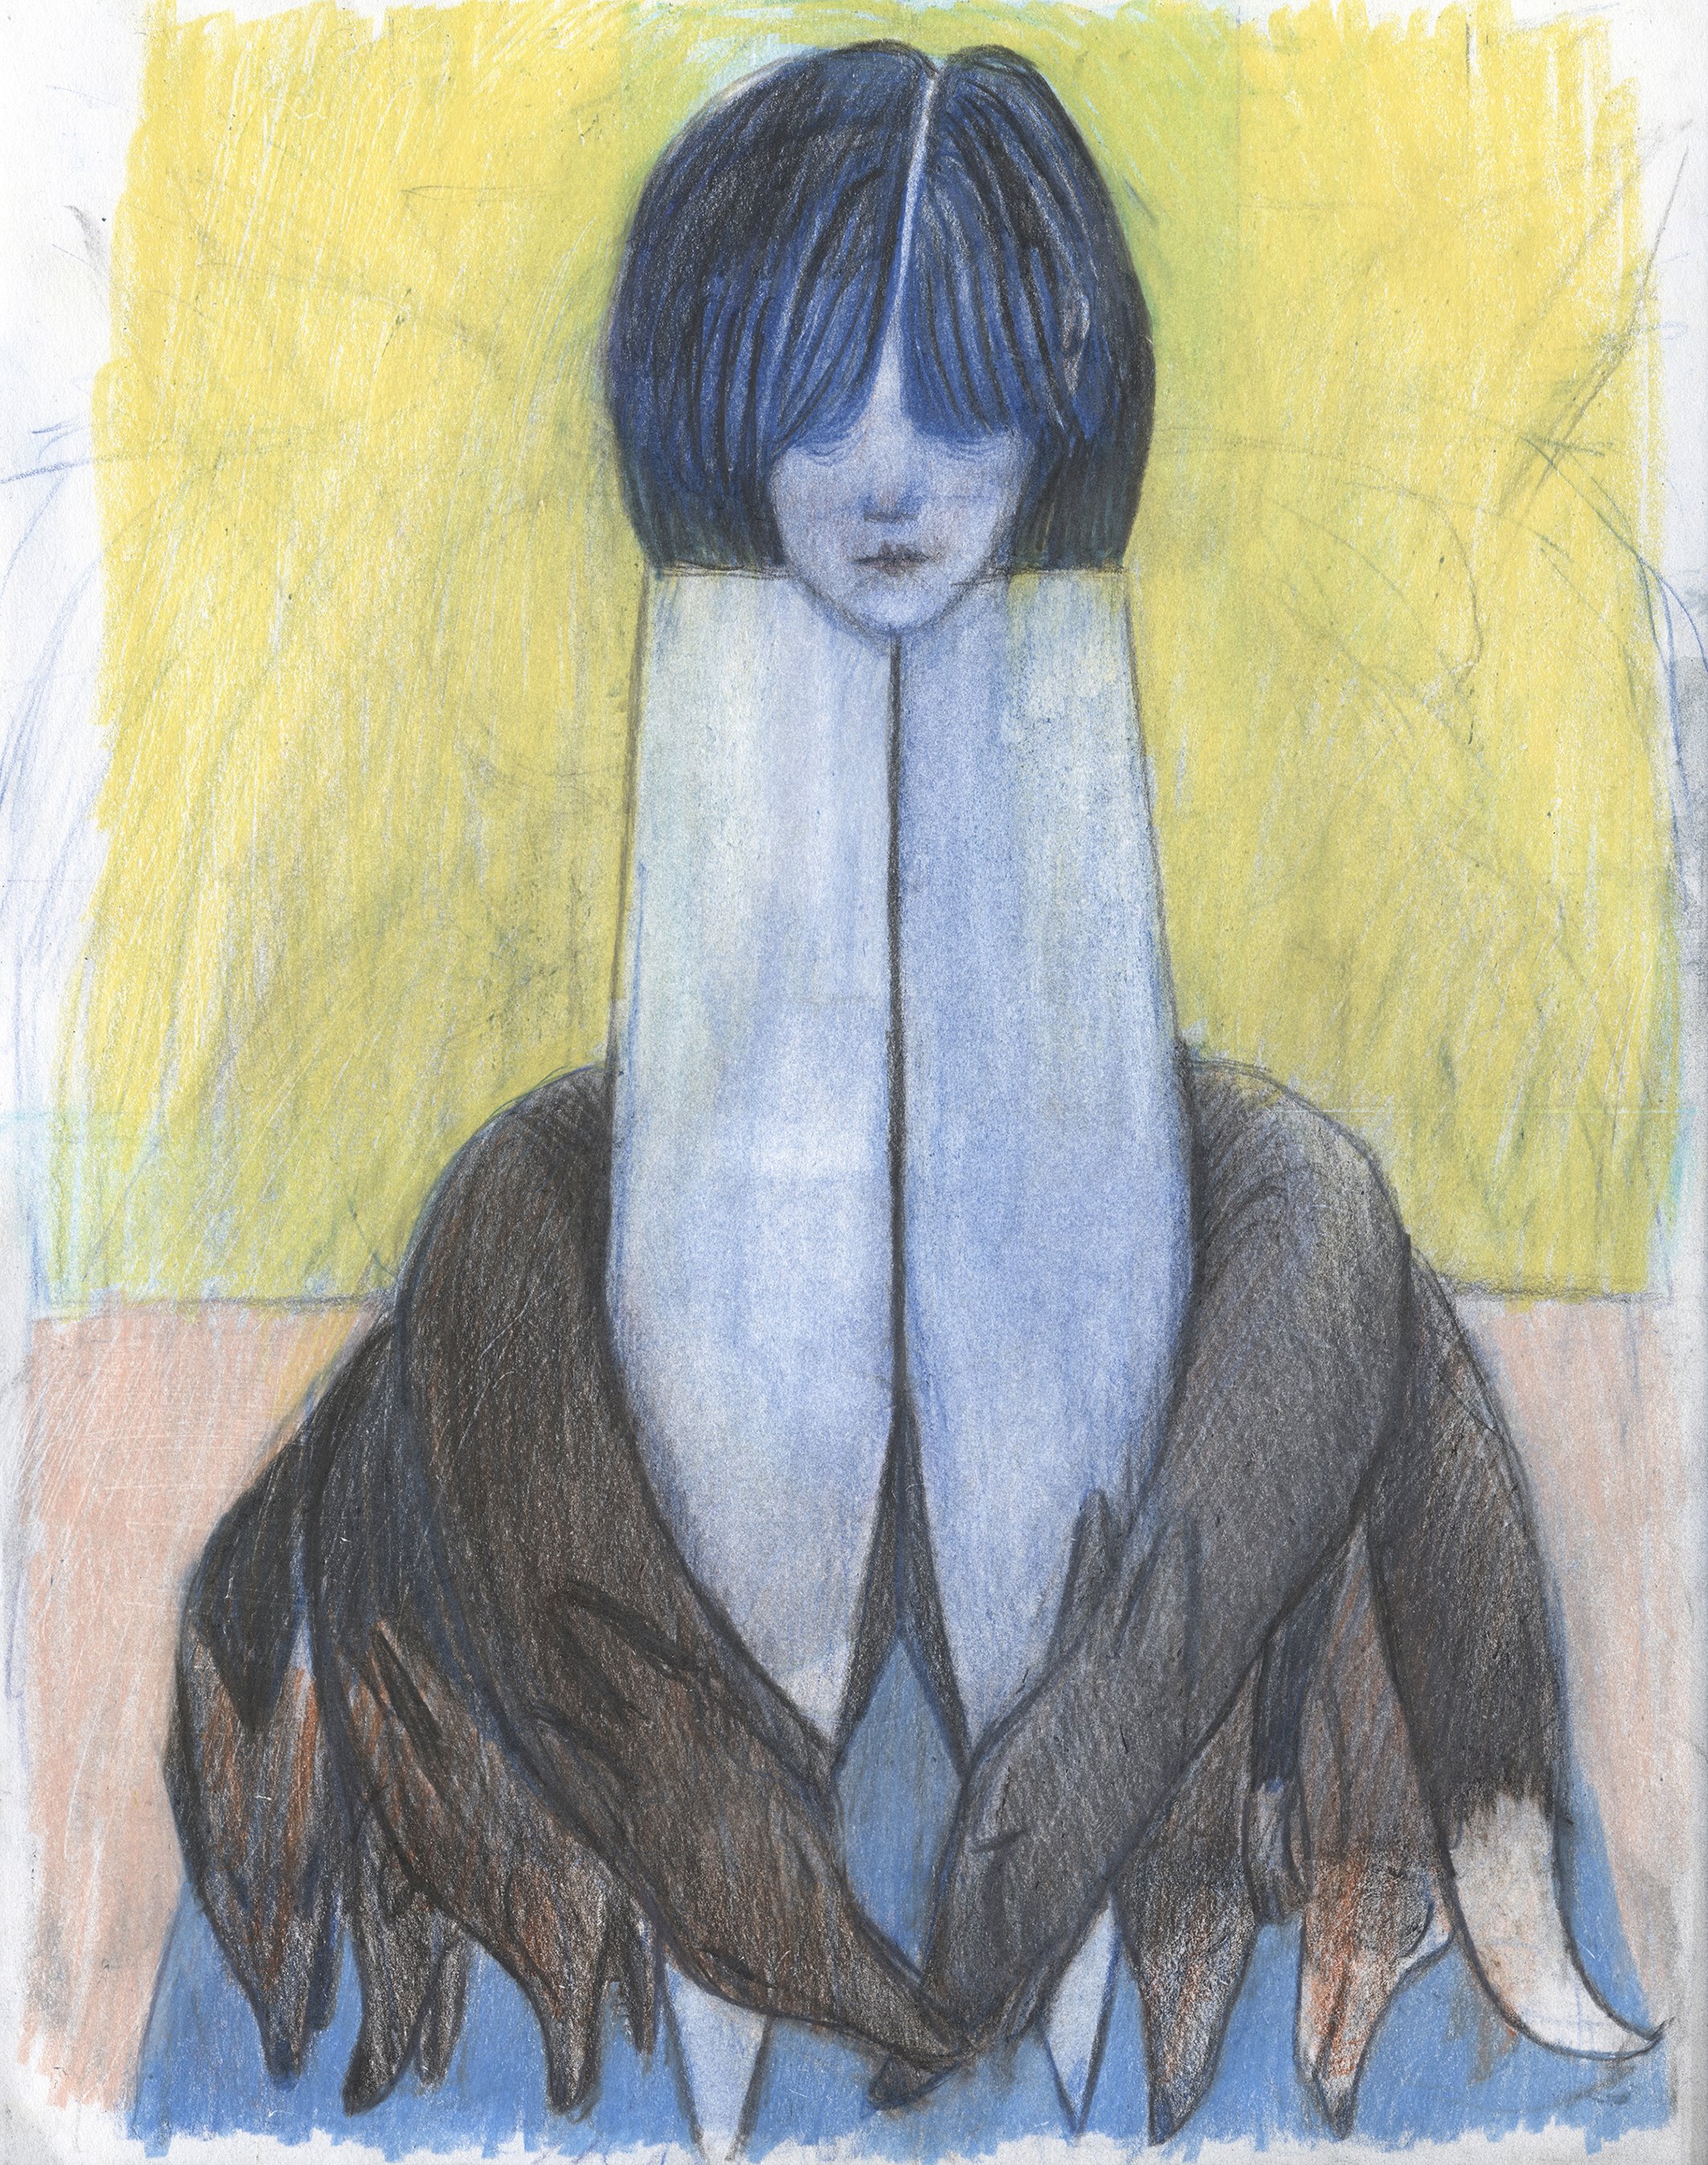  Untitled, Coloured pencil on paper, 34 x 27 cm, 2022 